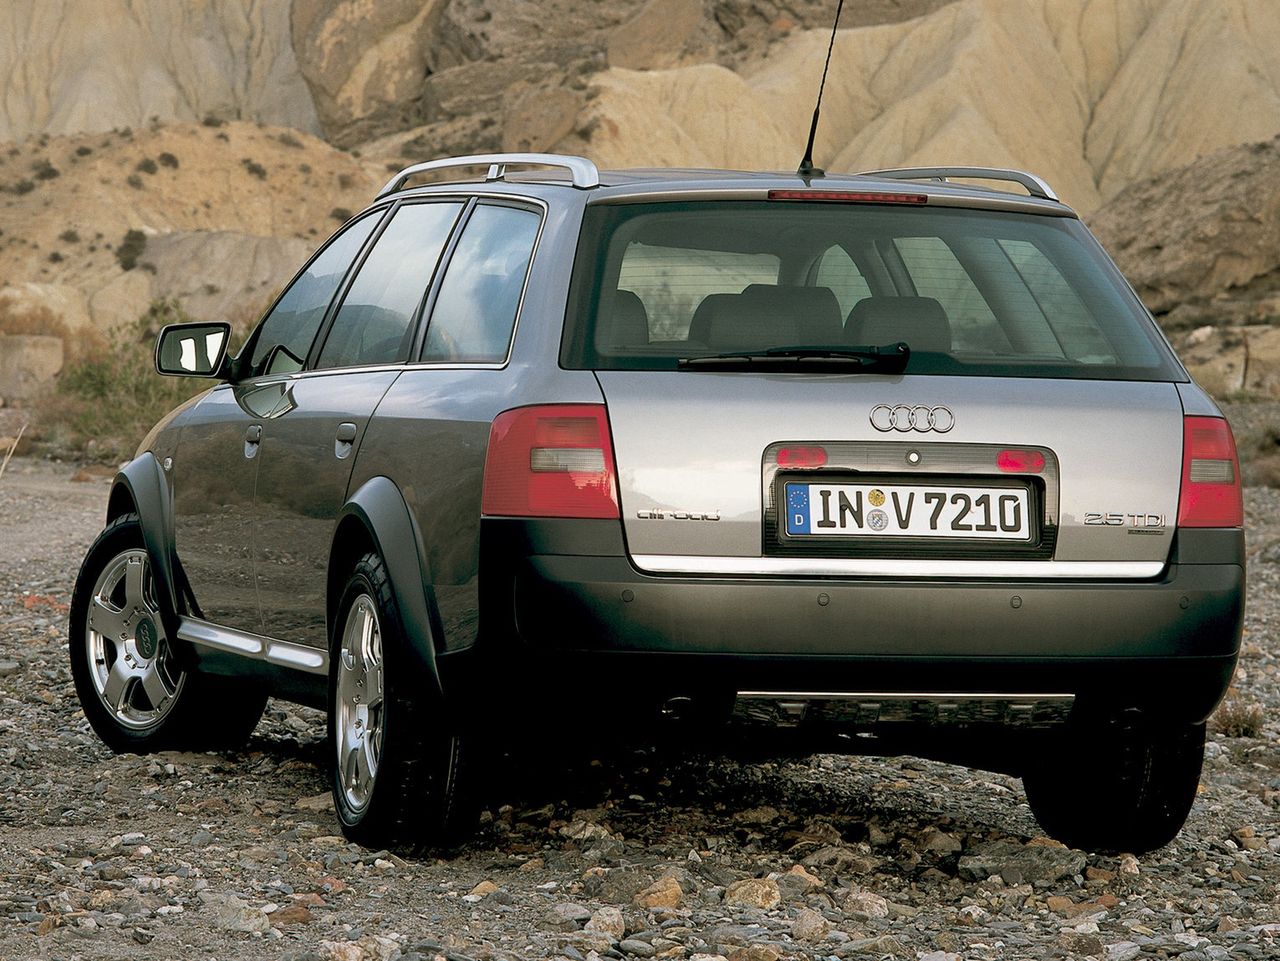 An exceptionally interesting vehicle with a 2.5 TDI engine, namely the Audi Allroad.